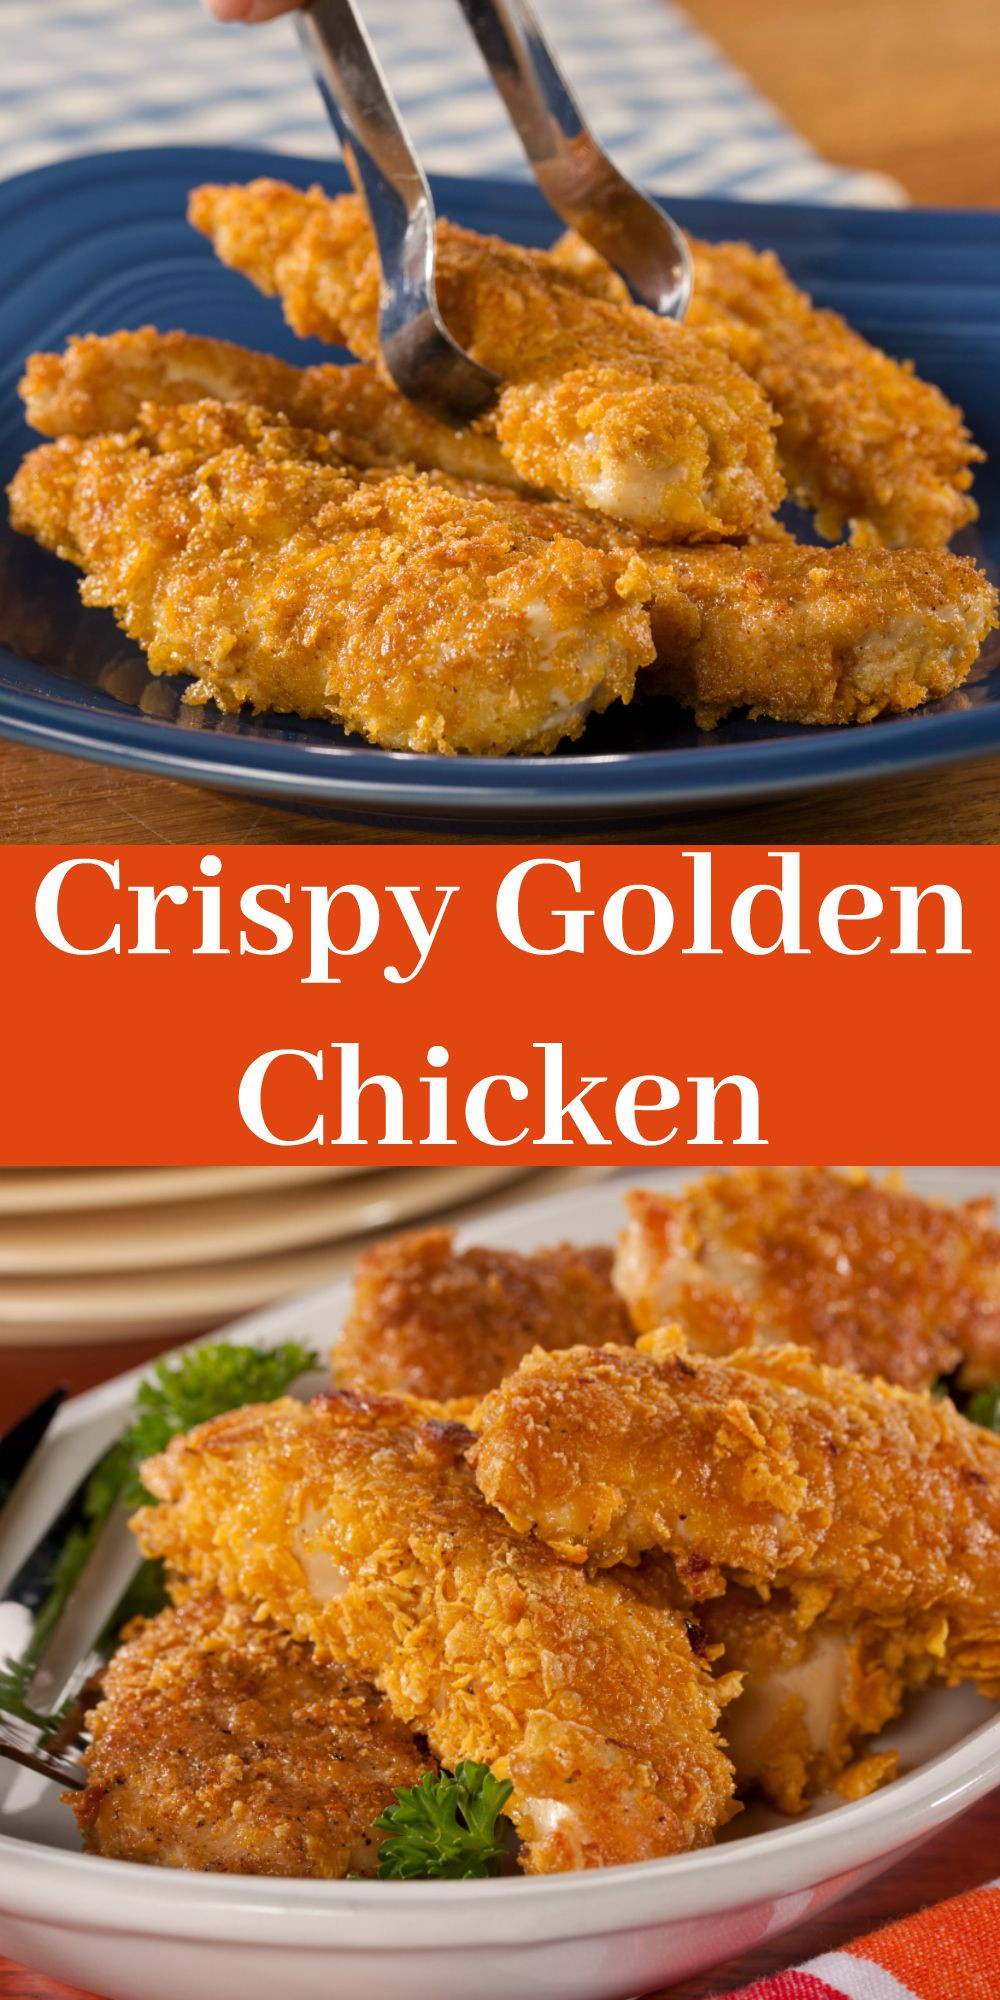 Diabetic Fried Chicken
 Our diabetic friendly version of fried chicken strips is